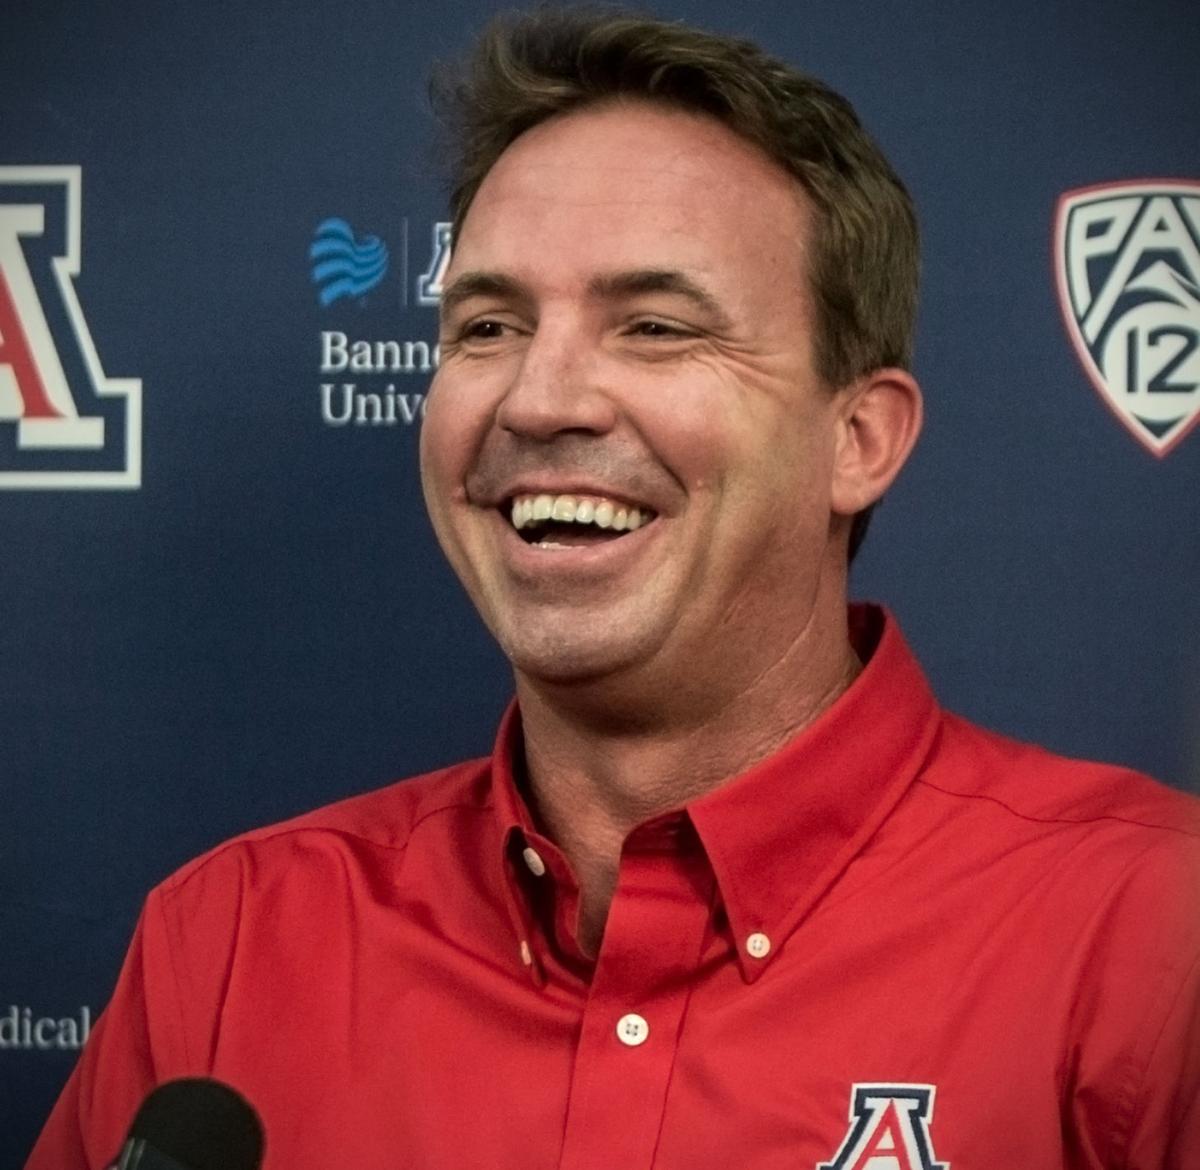 Talented young stuff joining new UA swim coach Augie Busch